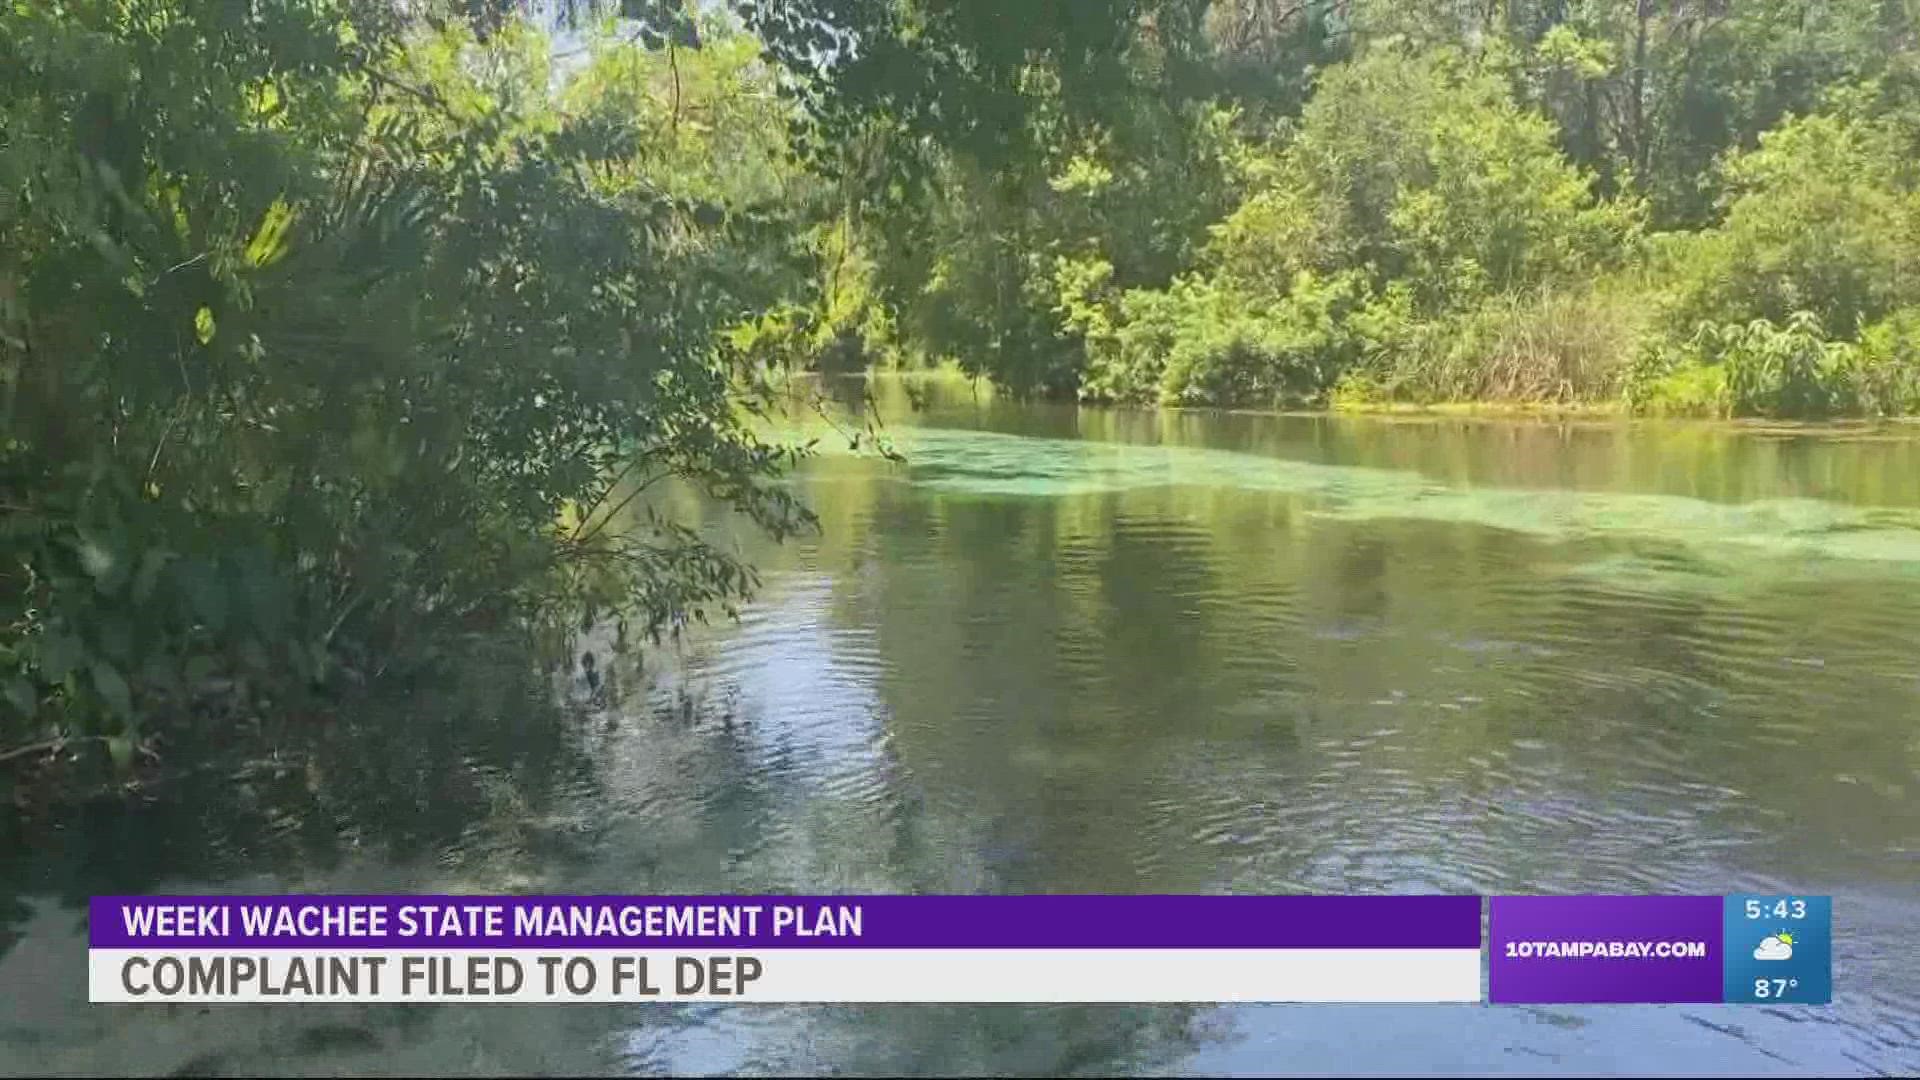 Last month, Weeki Wachee State Park updated its management plan. Soon after, an environmental advocate filed a complaint saying the plan was improperly approved.